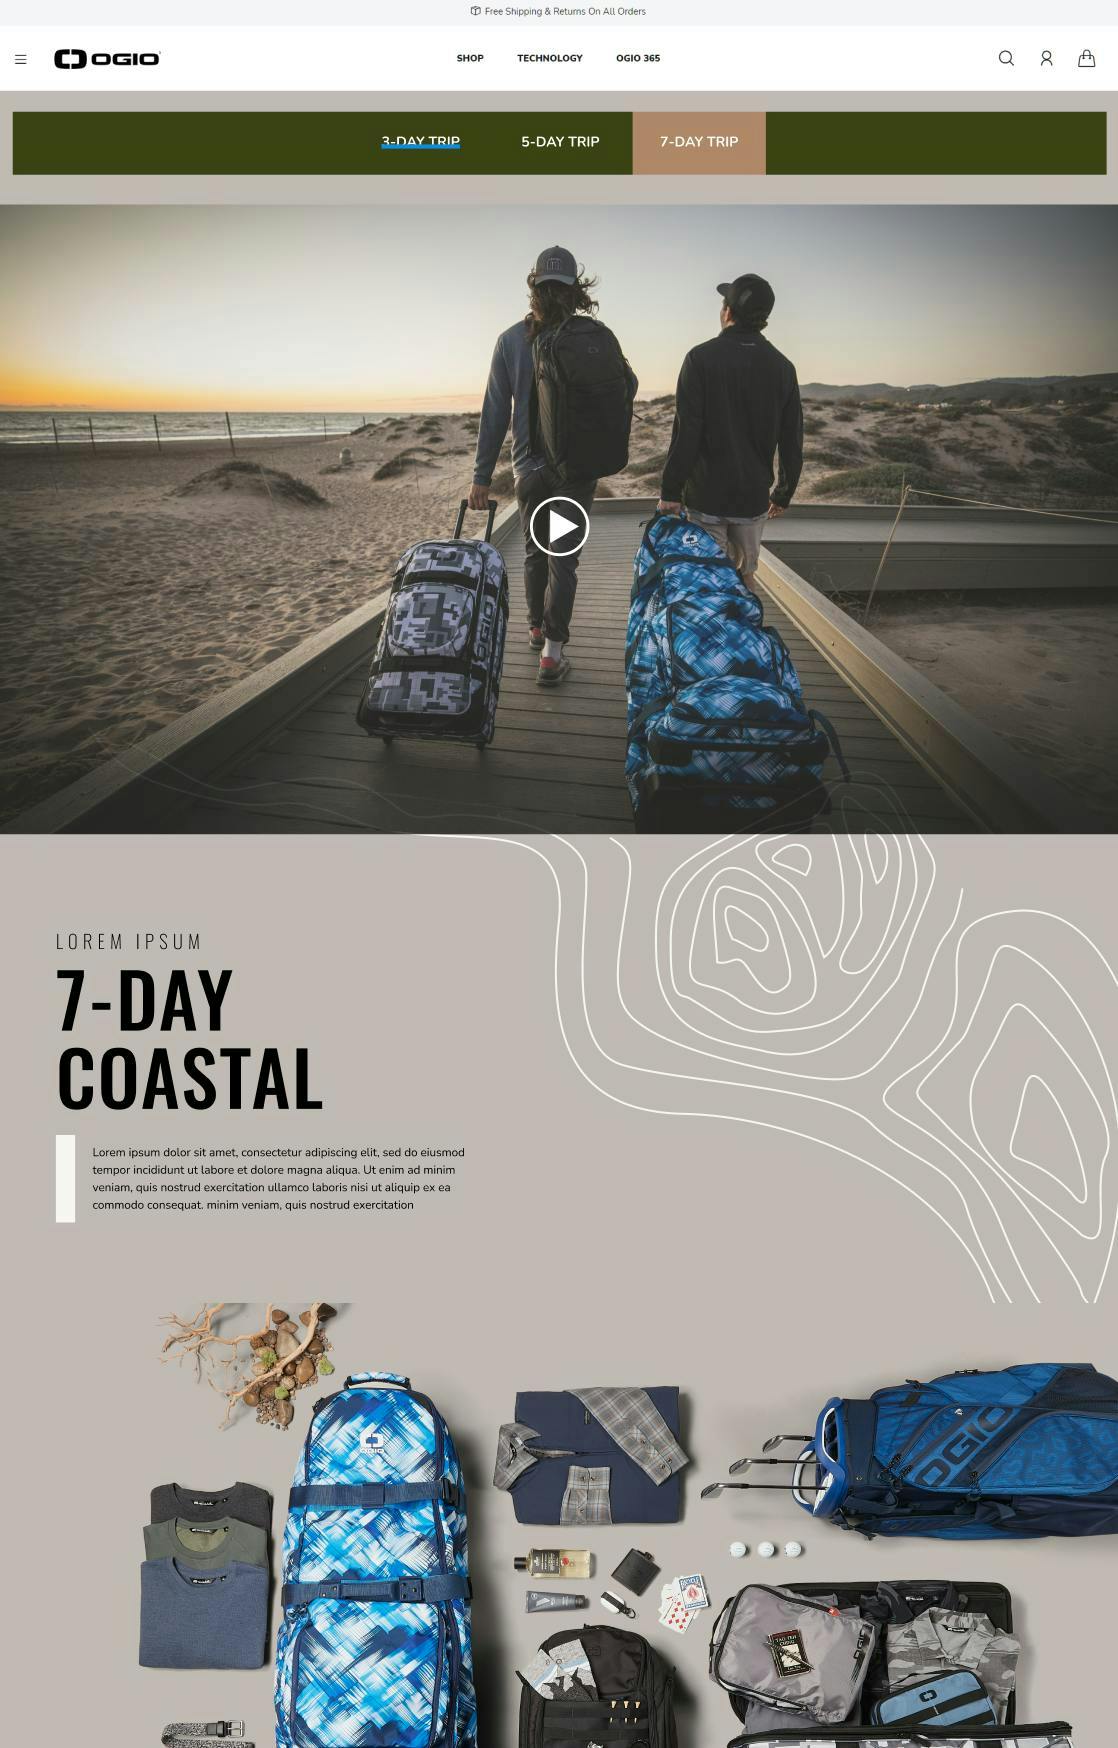 Ogio's ecommerce website showcasing: Two individuals walking along a beachfront path carrying backpacks and duffle bags, with a beautiful ocean view in the background.